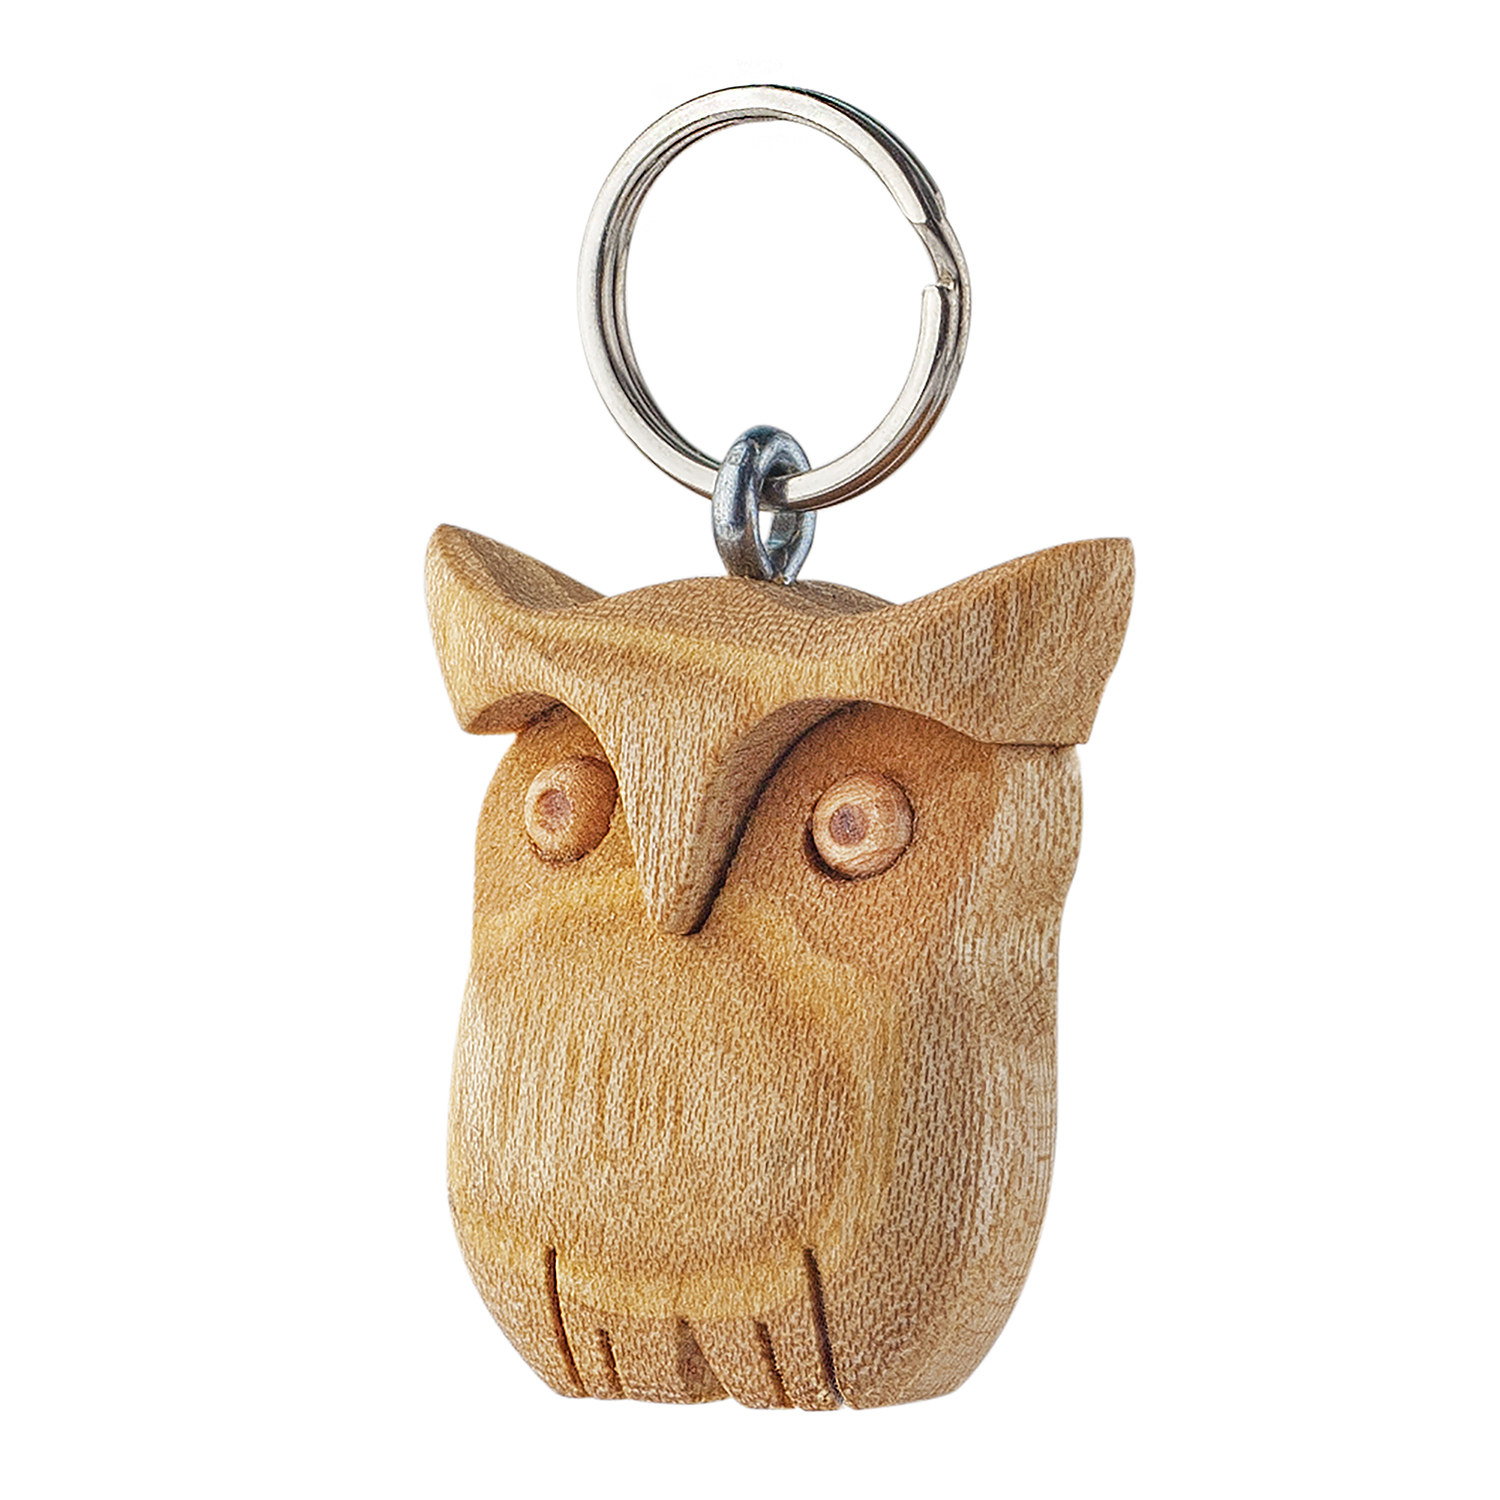 Wooden Owl shaped Keychain